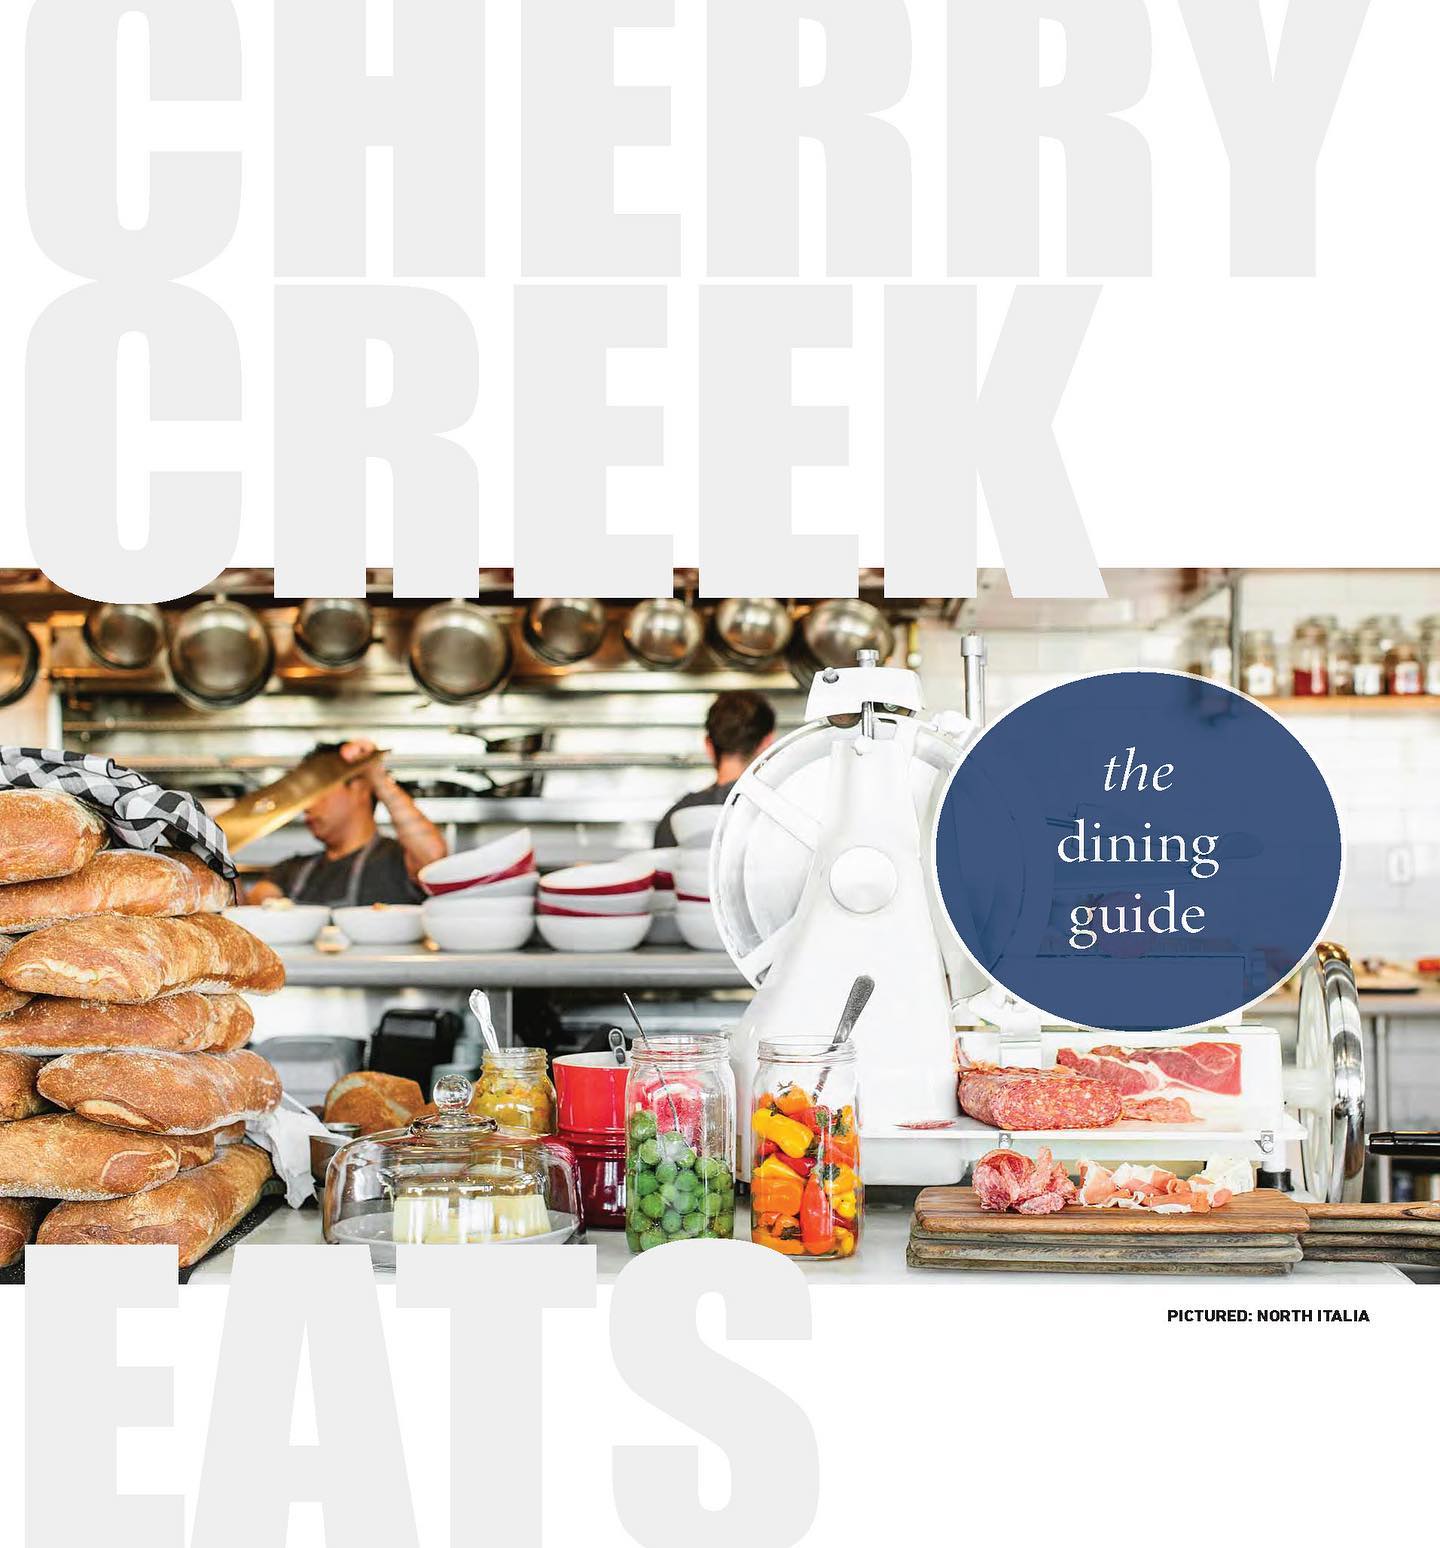 Have you seen the debut of our Cherry Creek Dining Guide? You’re going to get hungry, so plan accordingly for breakfasts, lunches, and dinners. We’re so lucky to have so many incredible food destinations in our amazing neighborhood. Go to our bio for all the deliciousness. Enjoy! #cherrycreekliving #cherrycreeknorth #cherrycreekdenver #cherrycreekdining #cherrycreekrestaurants #denverdining #denverrestaurants #303eats